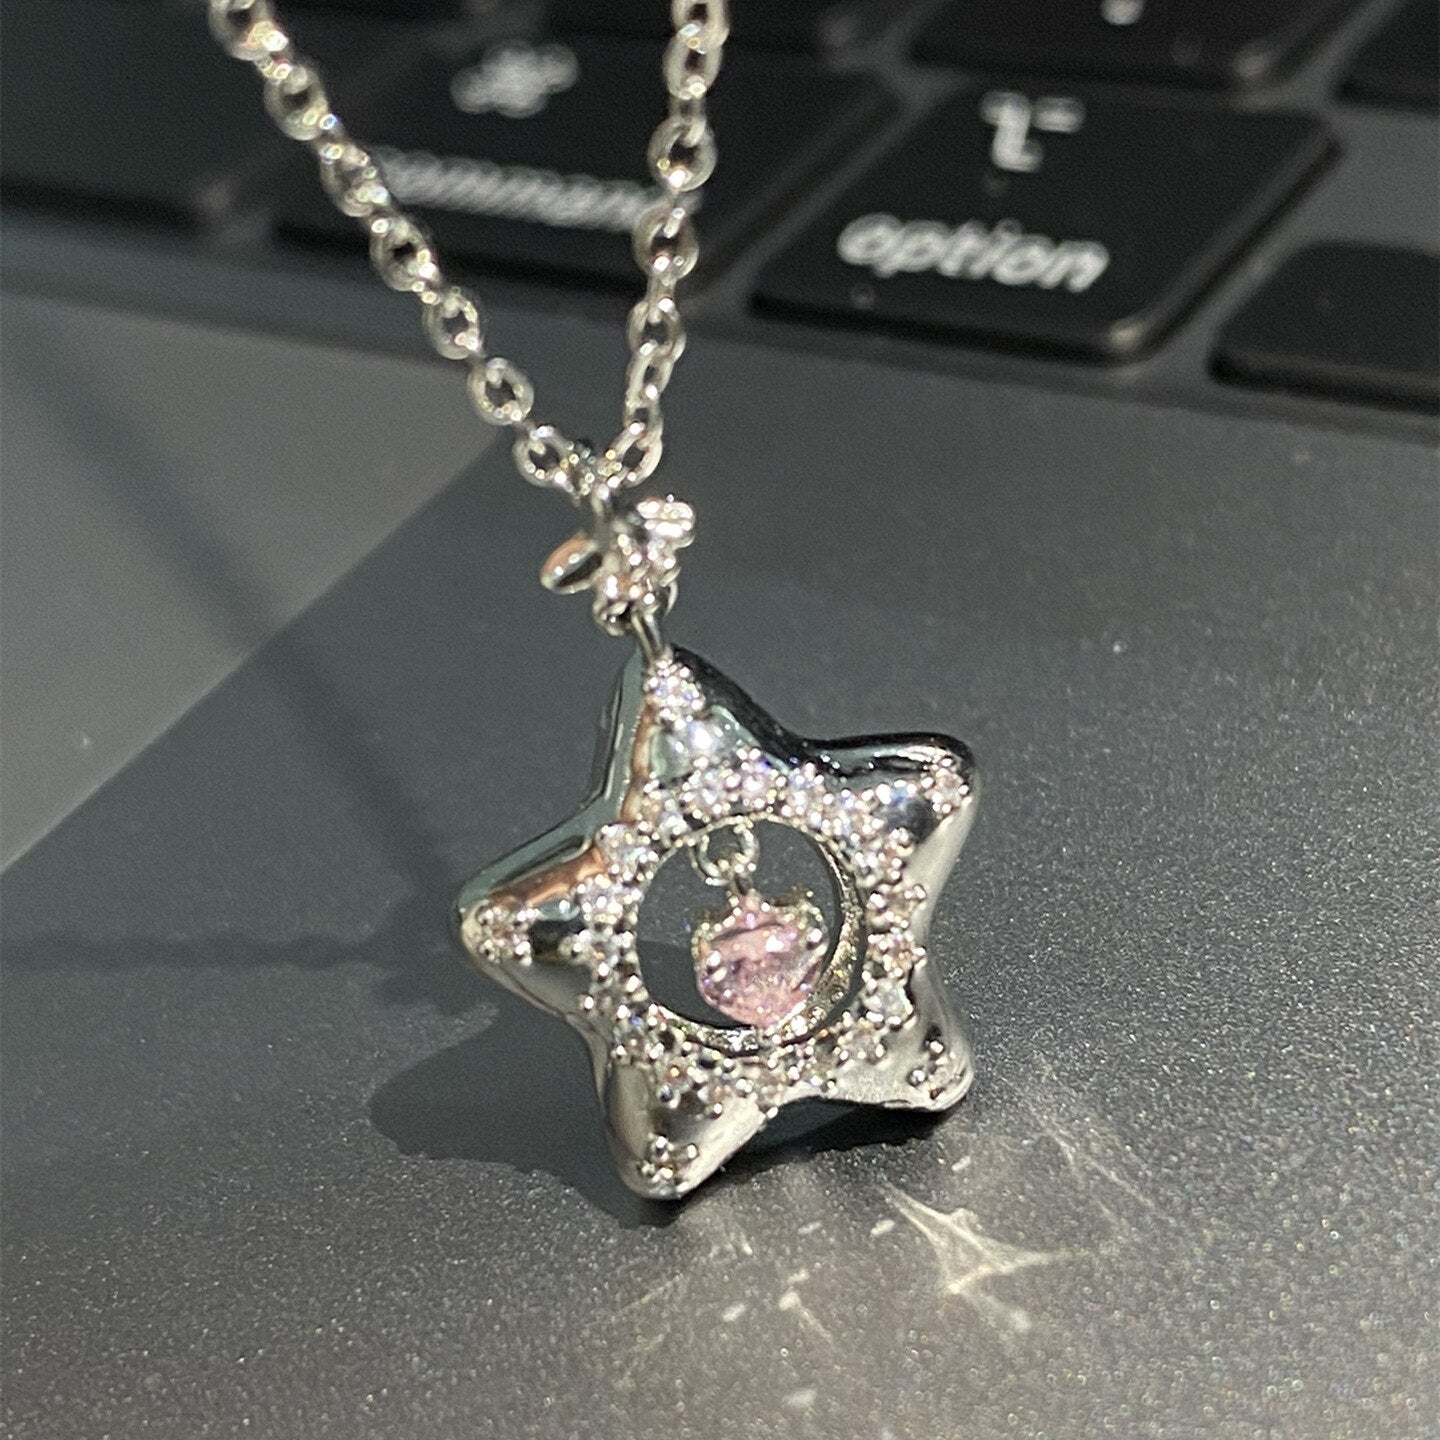 New Wishing Star Necklace Female Student Star Pentagon Pendant Necklace Birthday Party Valentine's Day Jewelry Gift Accessories